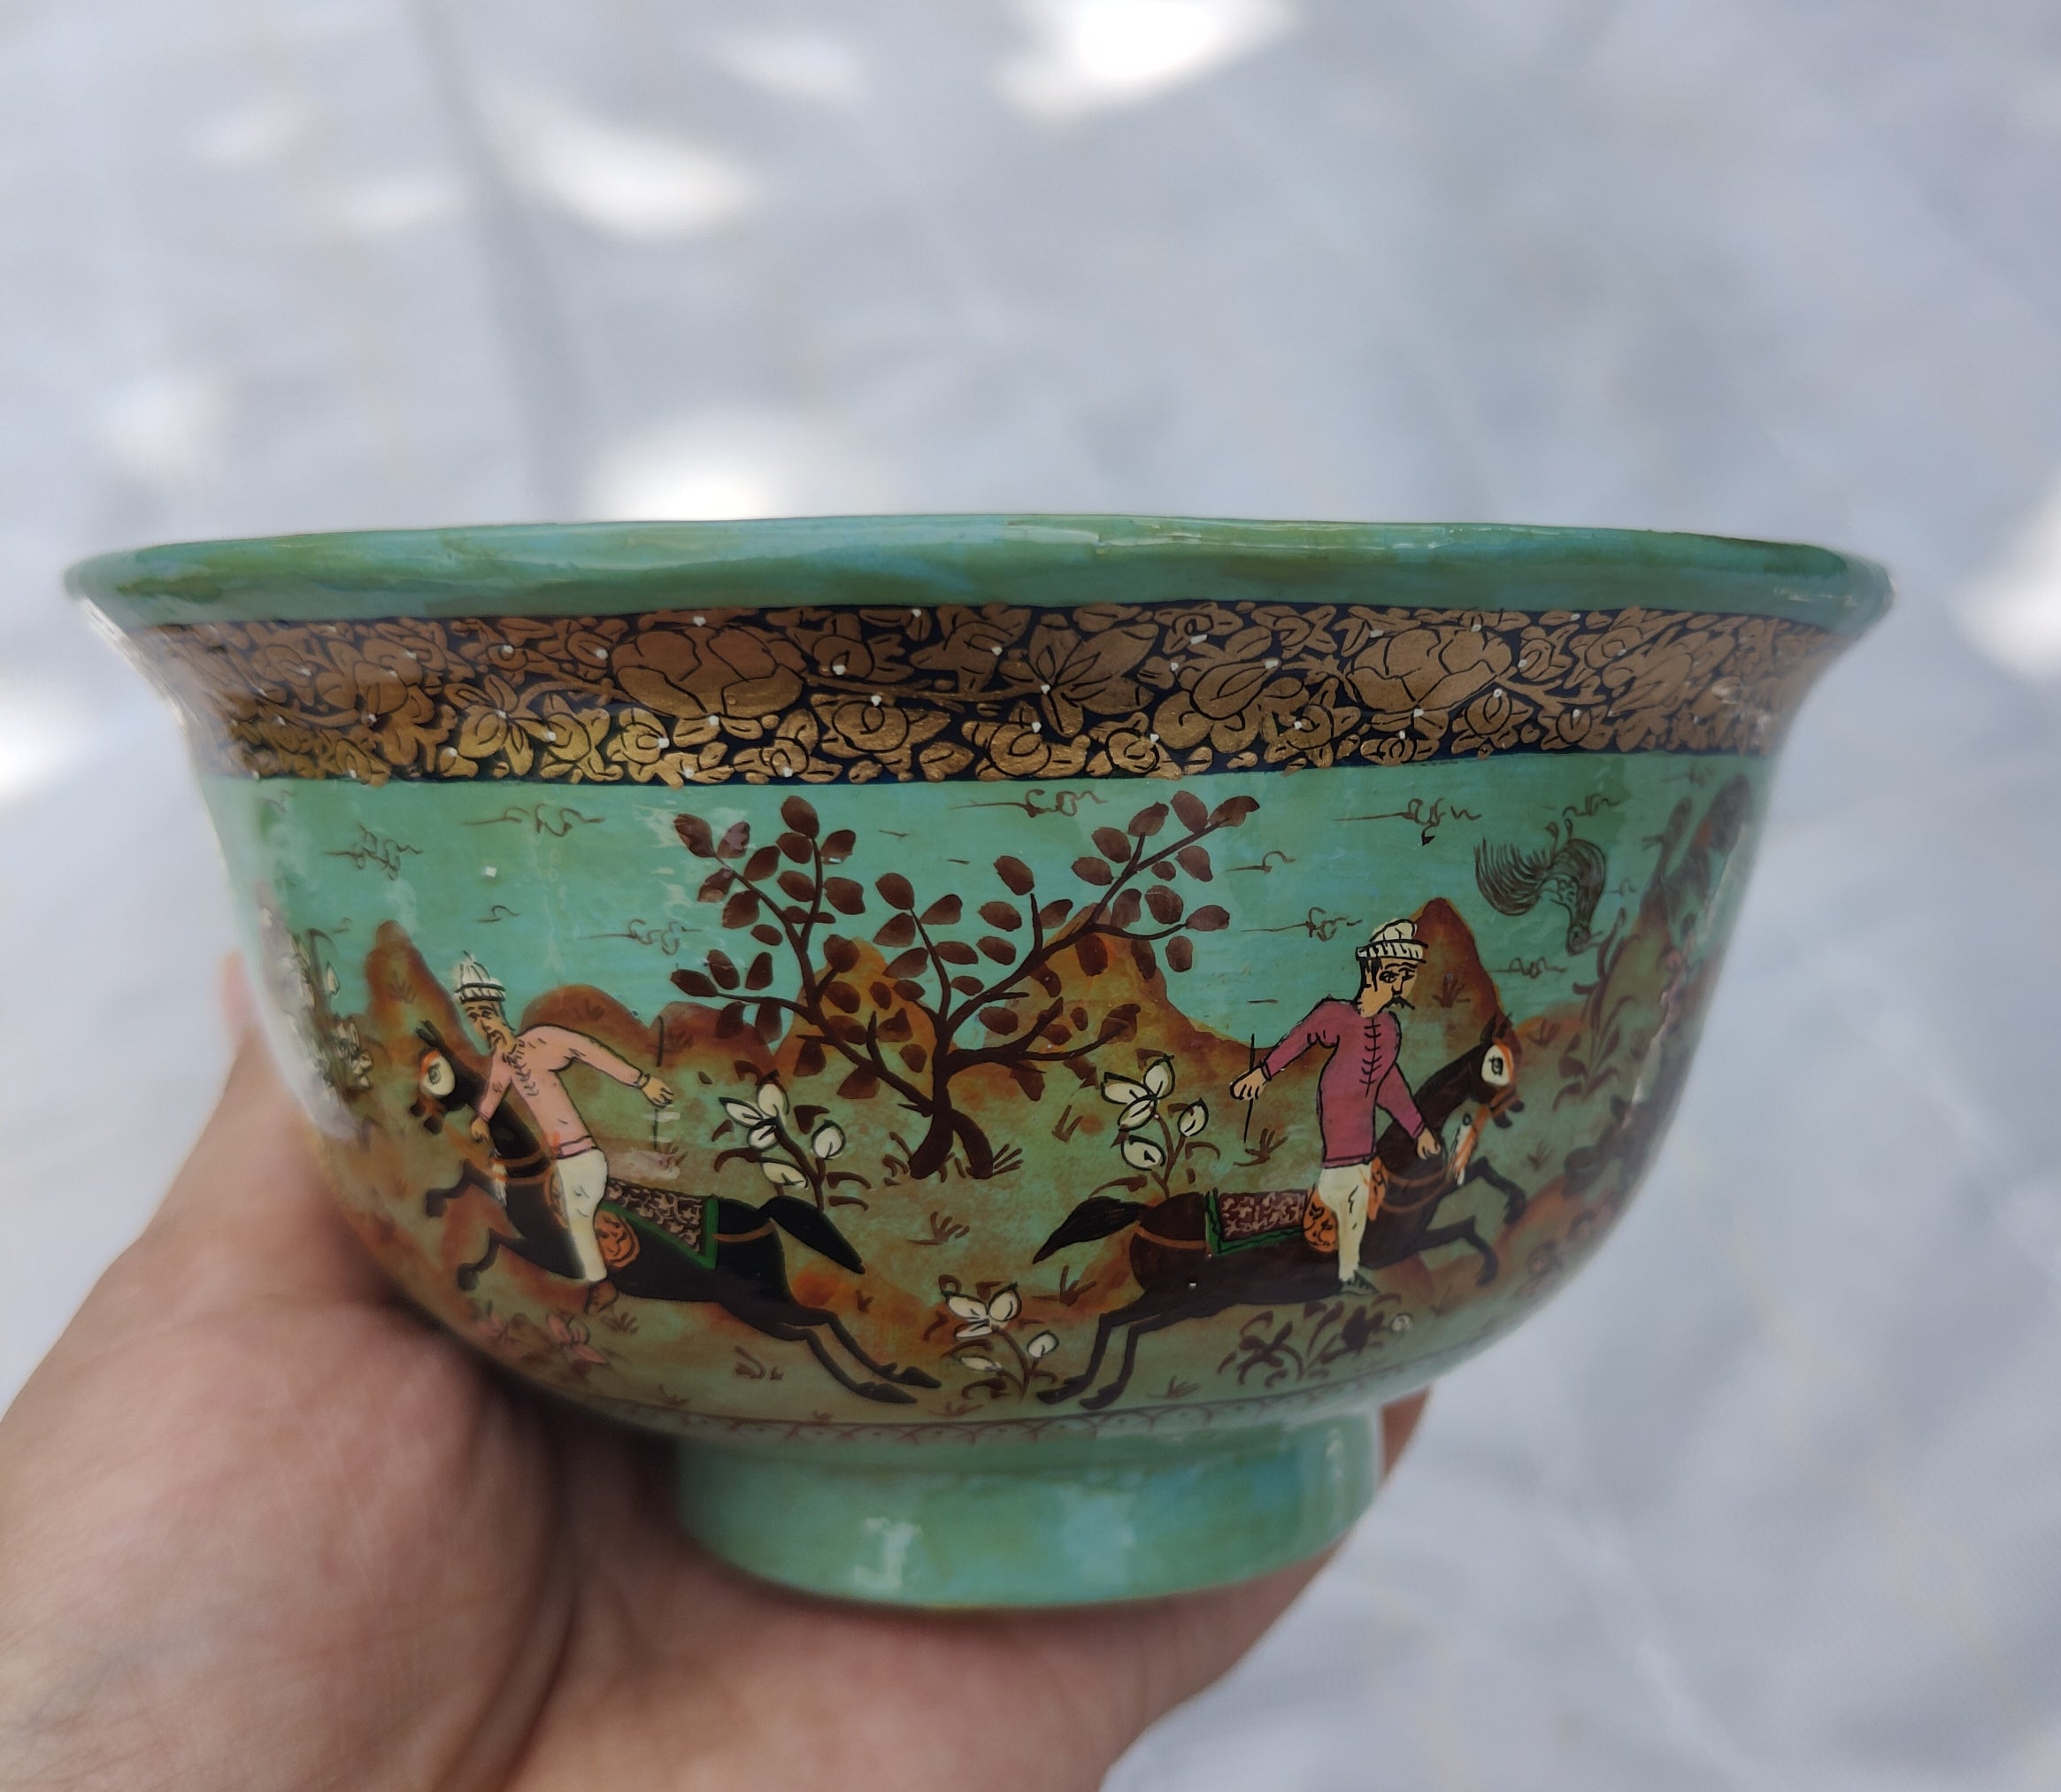 Sonth x Fayaz Ahmad Jan - Hunting in Turquoise Bowl